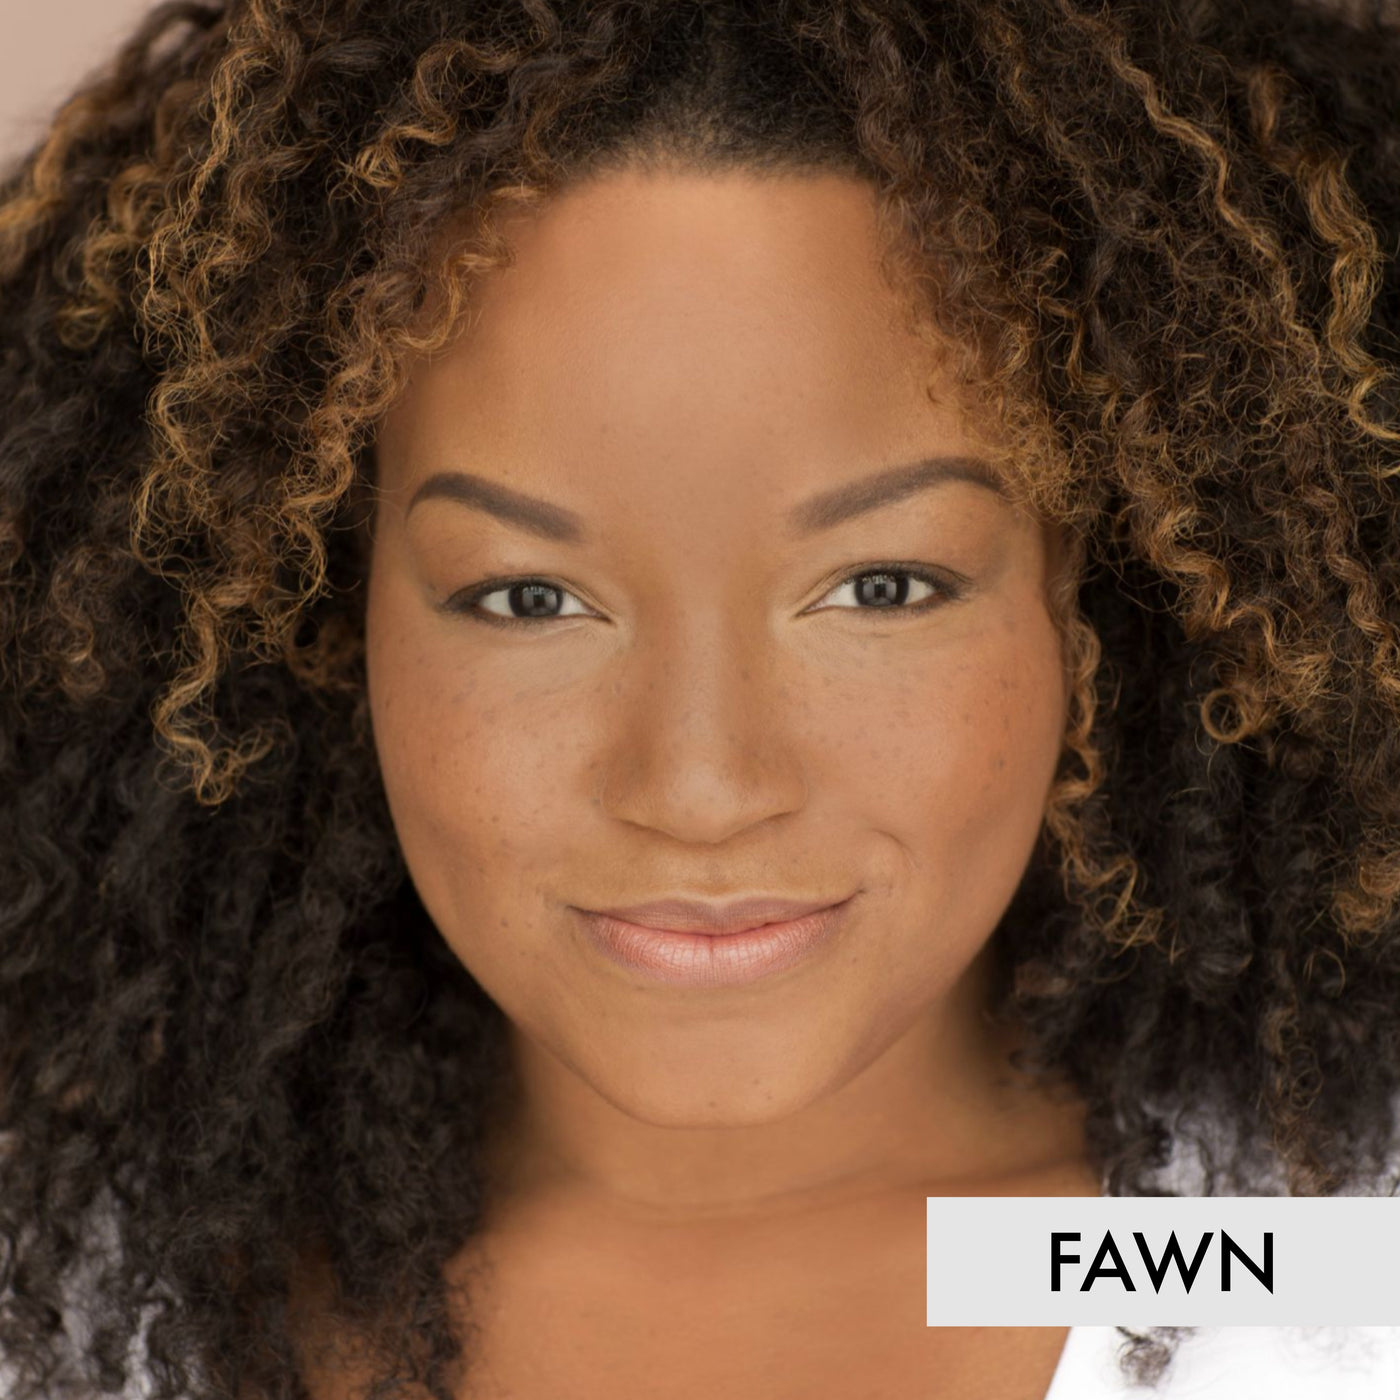 profile of woman wearing the fawn liquid powder foundation makeup